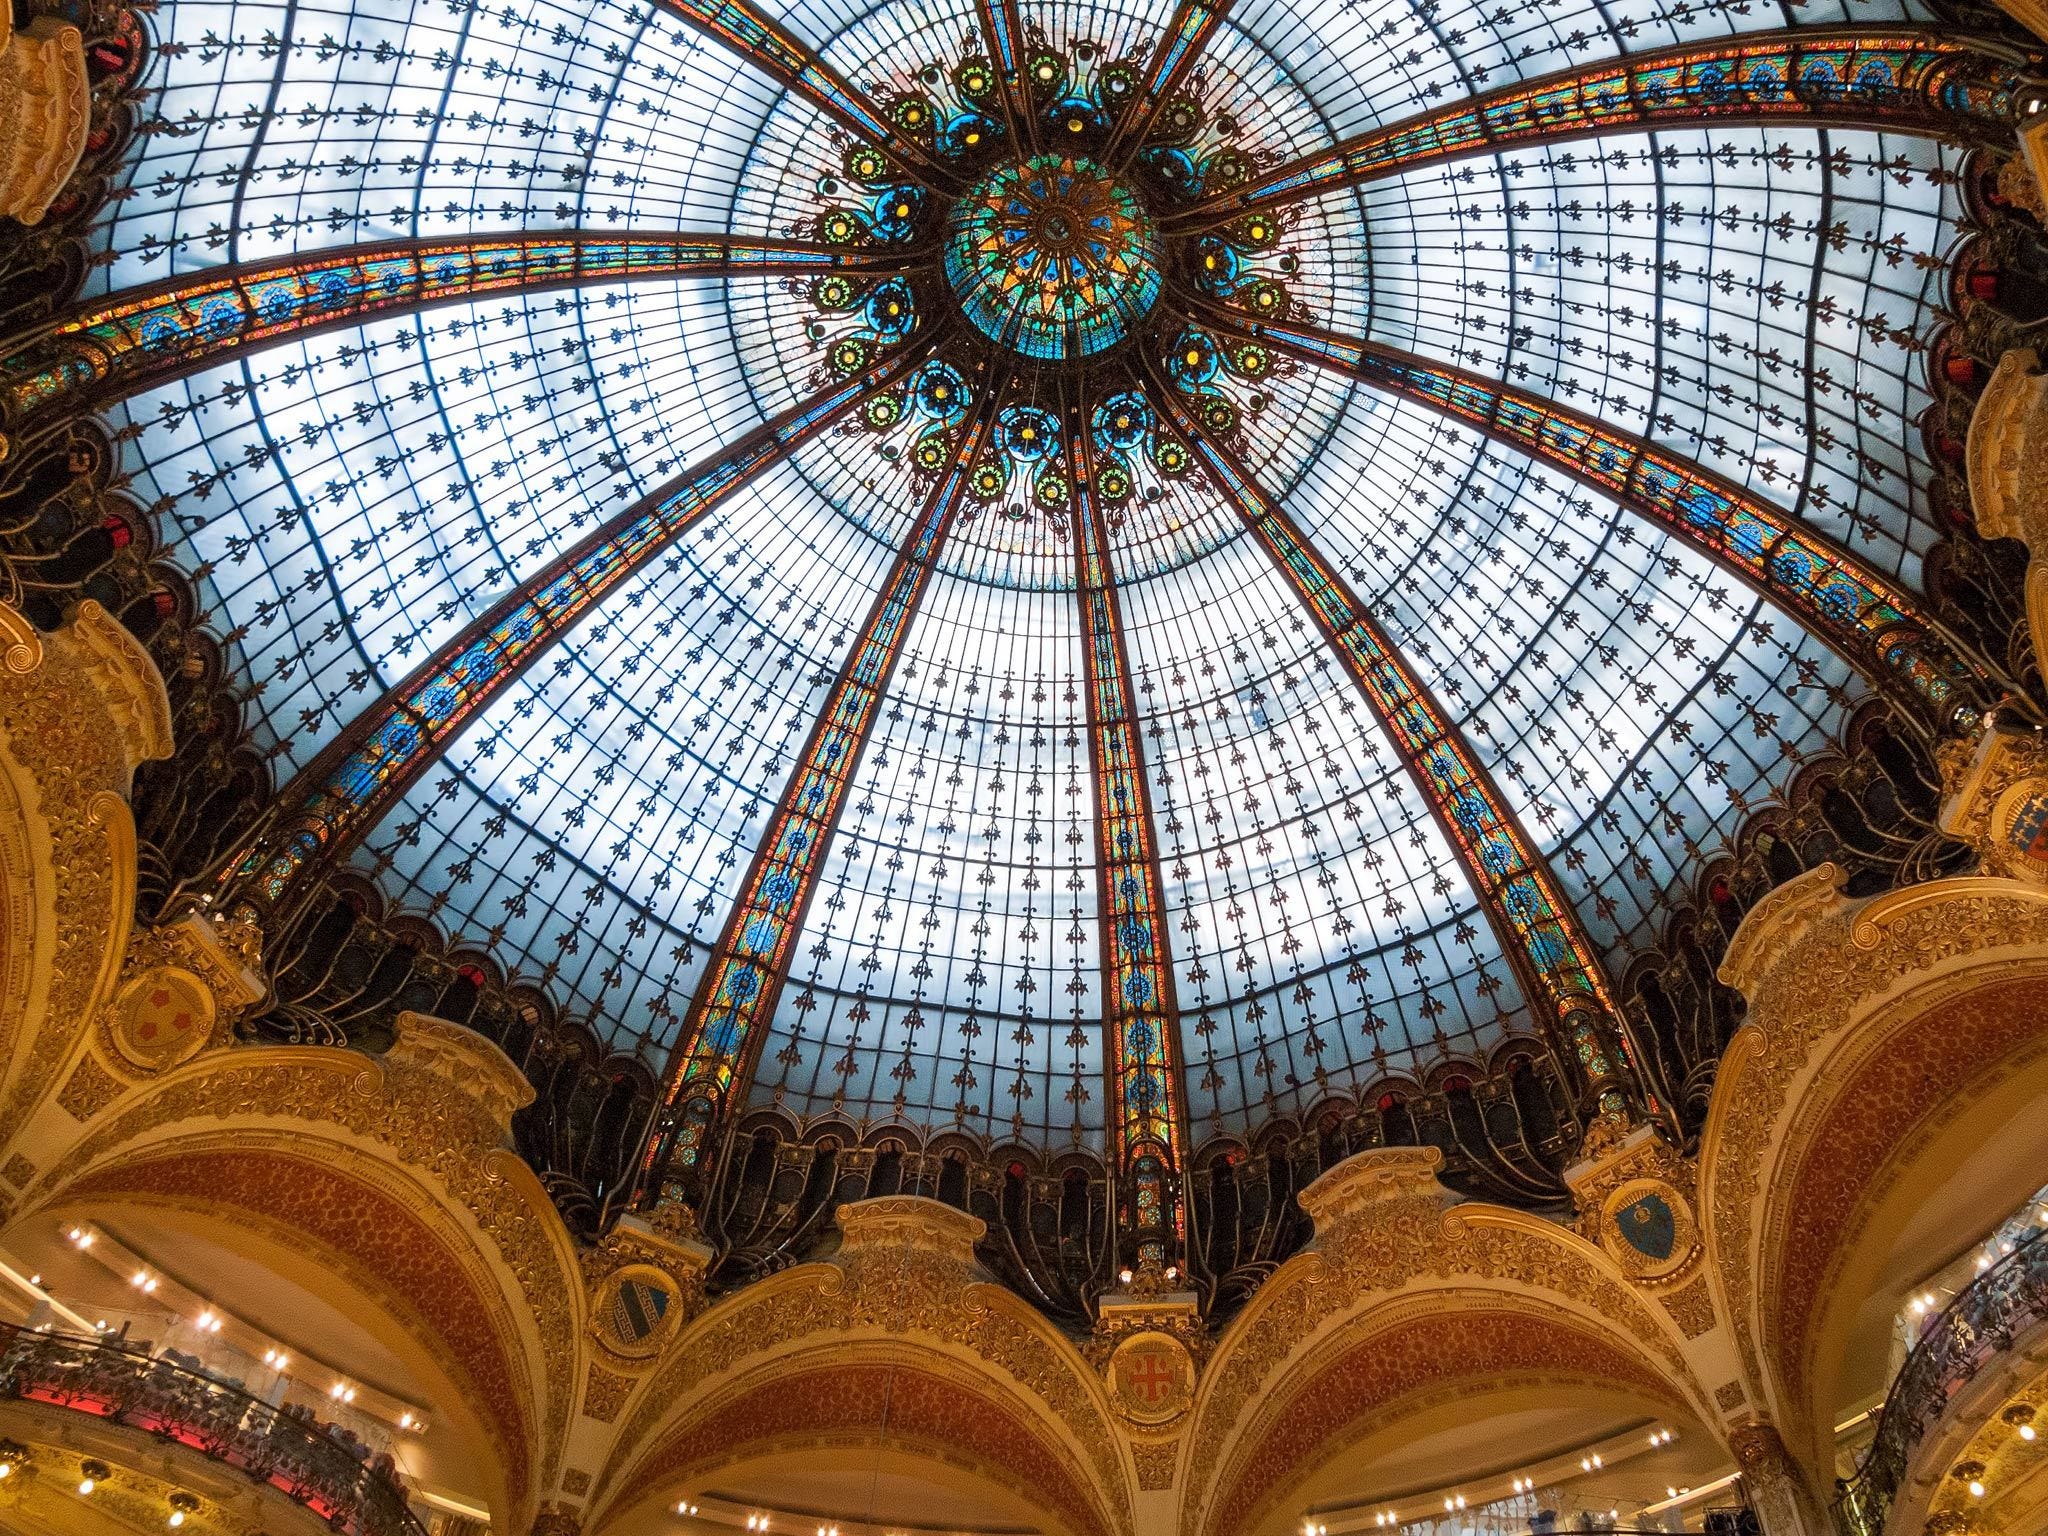 DFS unveils a 'place of discovery' as La Samaritaine reopens